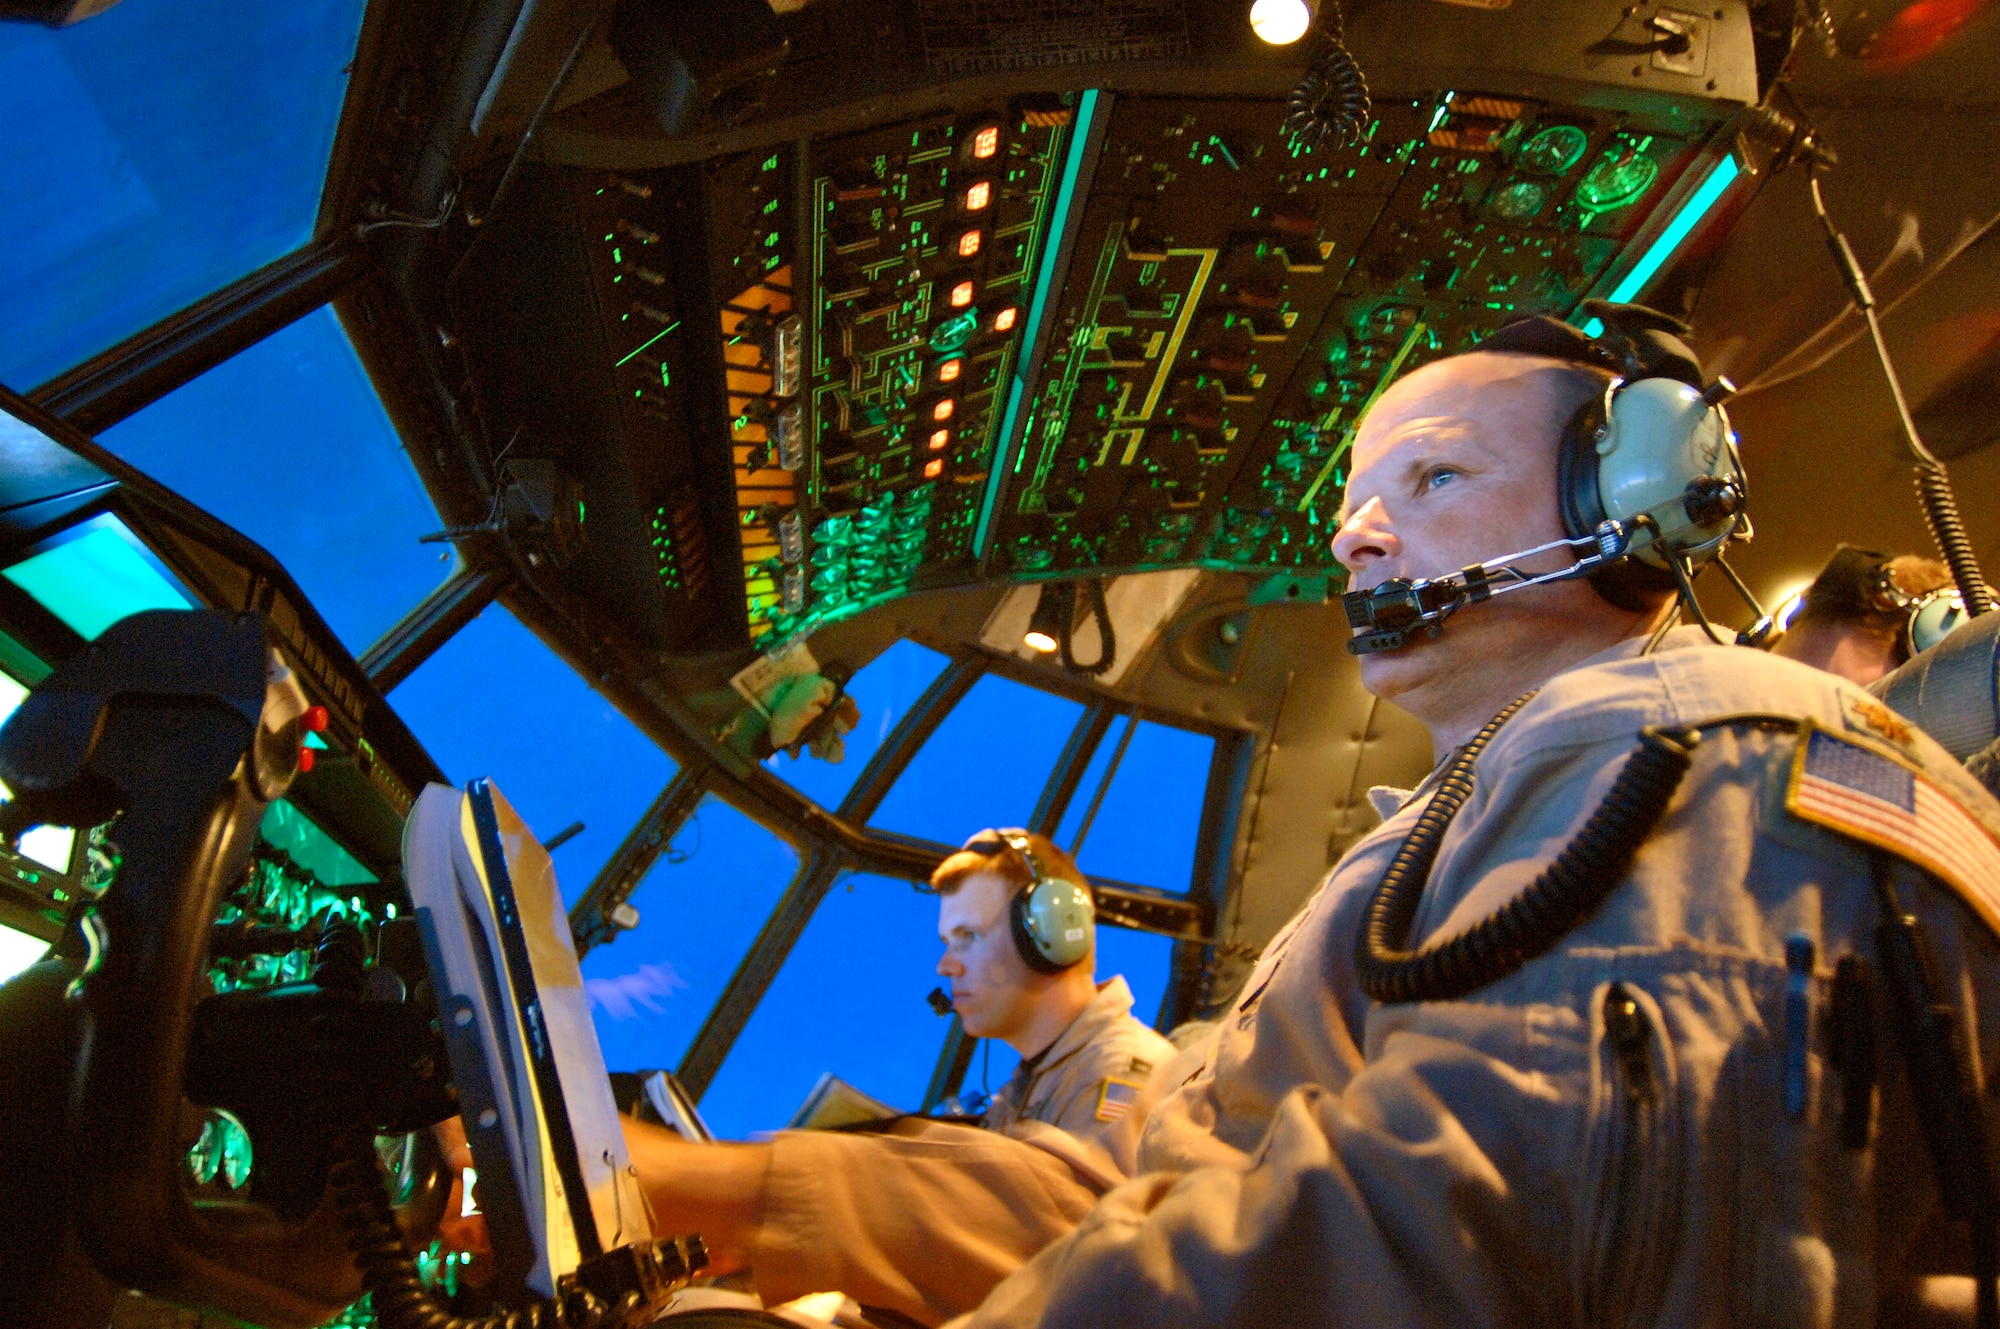 Maj. Mike Steigerwald (right) and Capt. Brady Ohr view the control panel on their C-130 Hercules and surrounding airspace during a combat support flight over Southwest Asia on Wednesday, April 19, 2006. The reservists are deployed to the 746th Expeditionary Airlift Squadron from the 327th Airlift Squadron at Willow Grove Air Reserve Station, Pa. (U.S. Air Force photo/Master Sgt. Lance Cheung)
